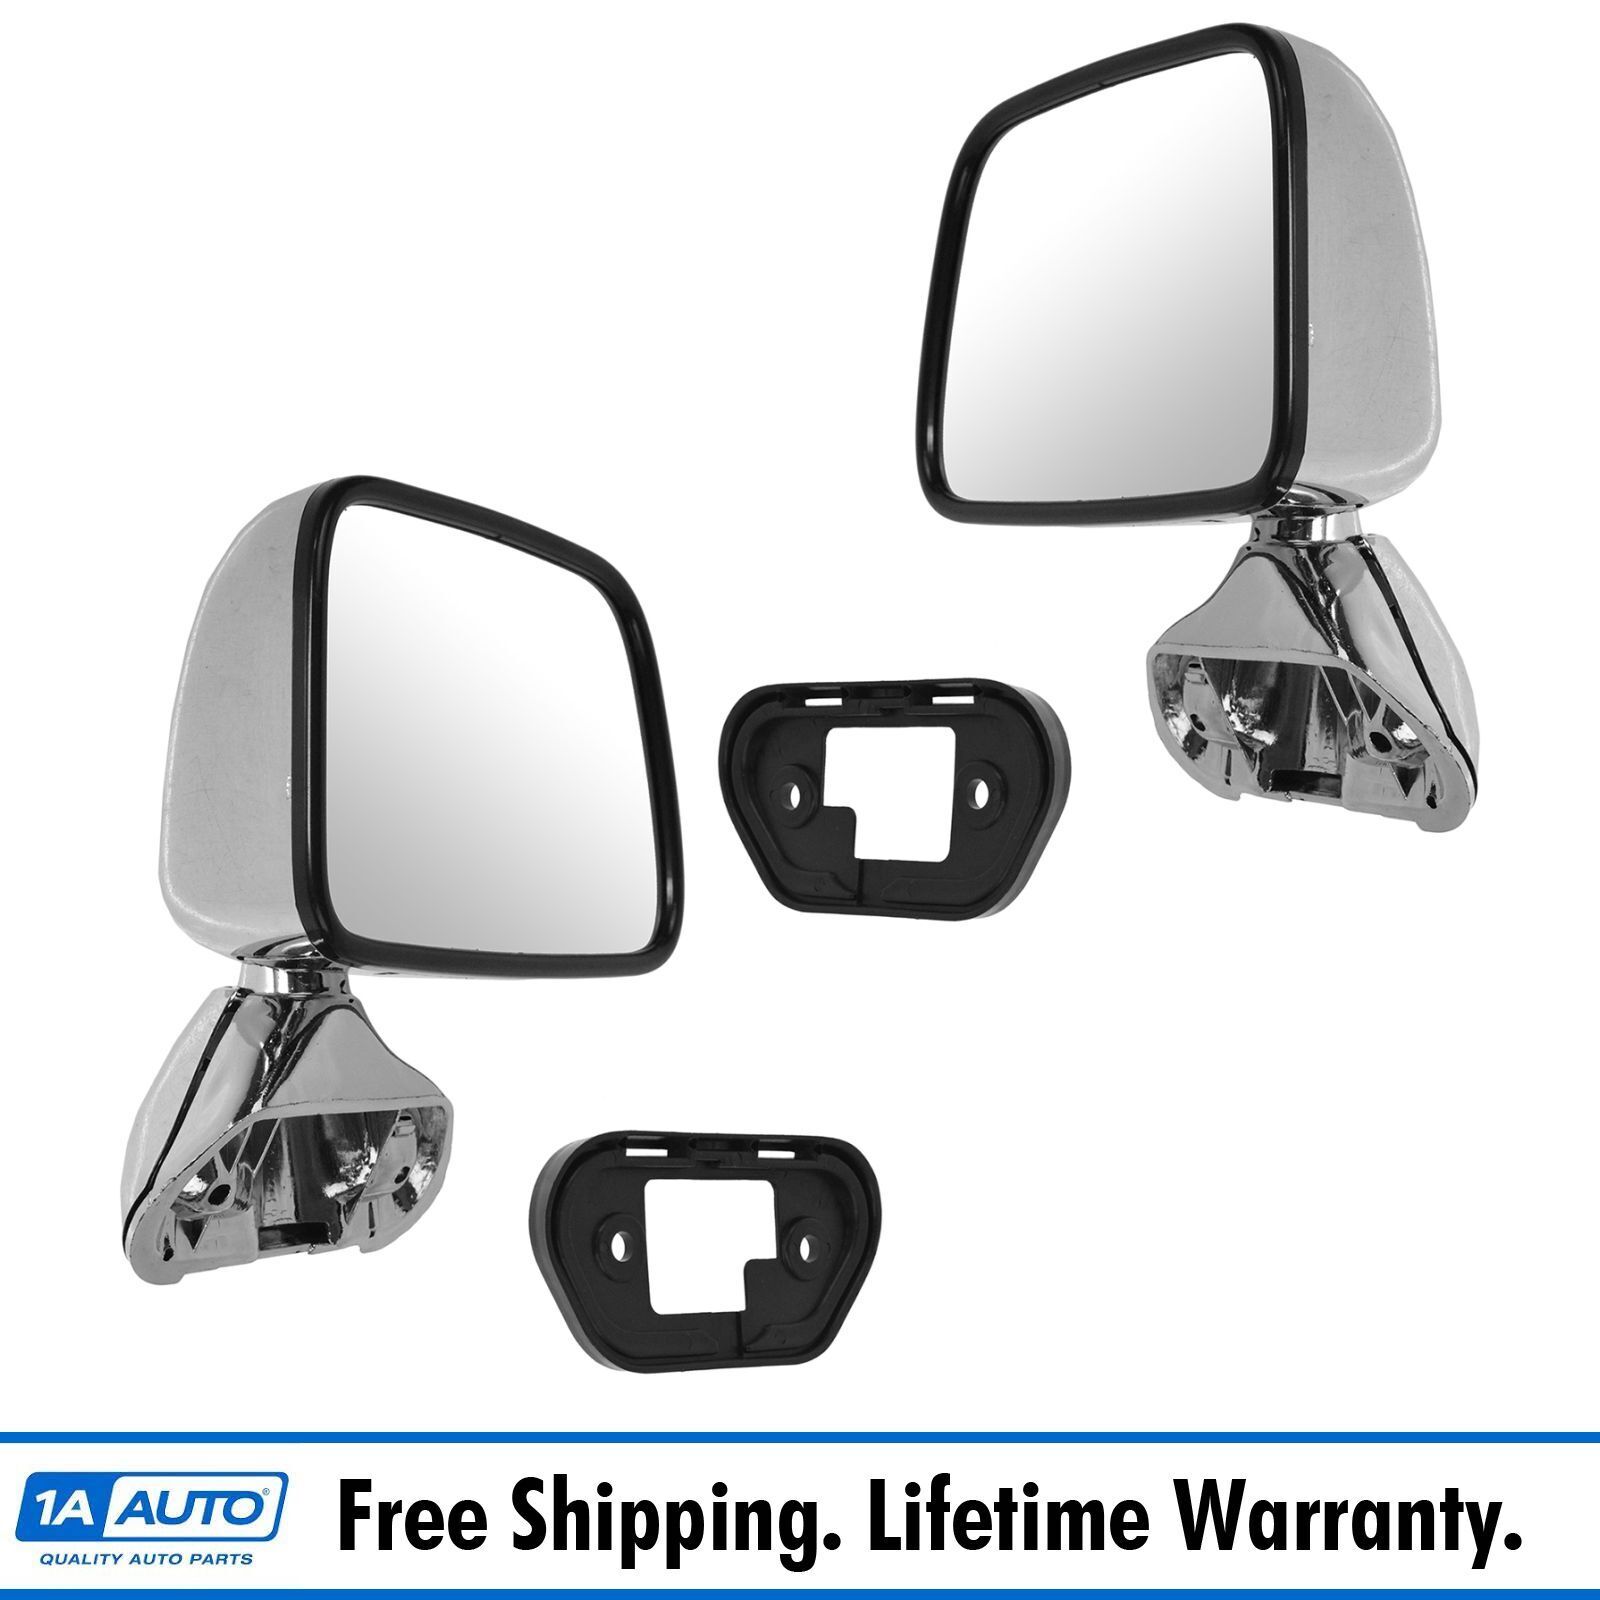 Manual Side View Mirrors Chrome Pair Set for 87-88 Toyota Pickup Truck 4Runner